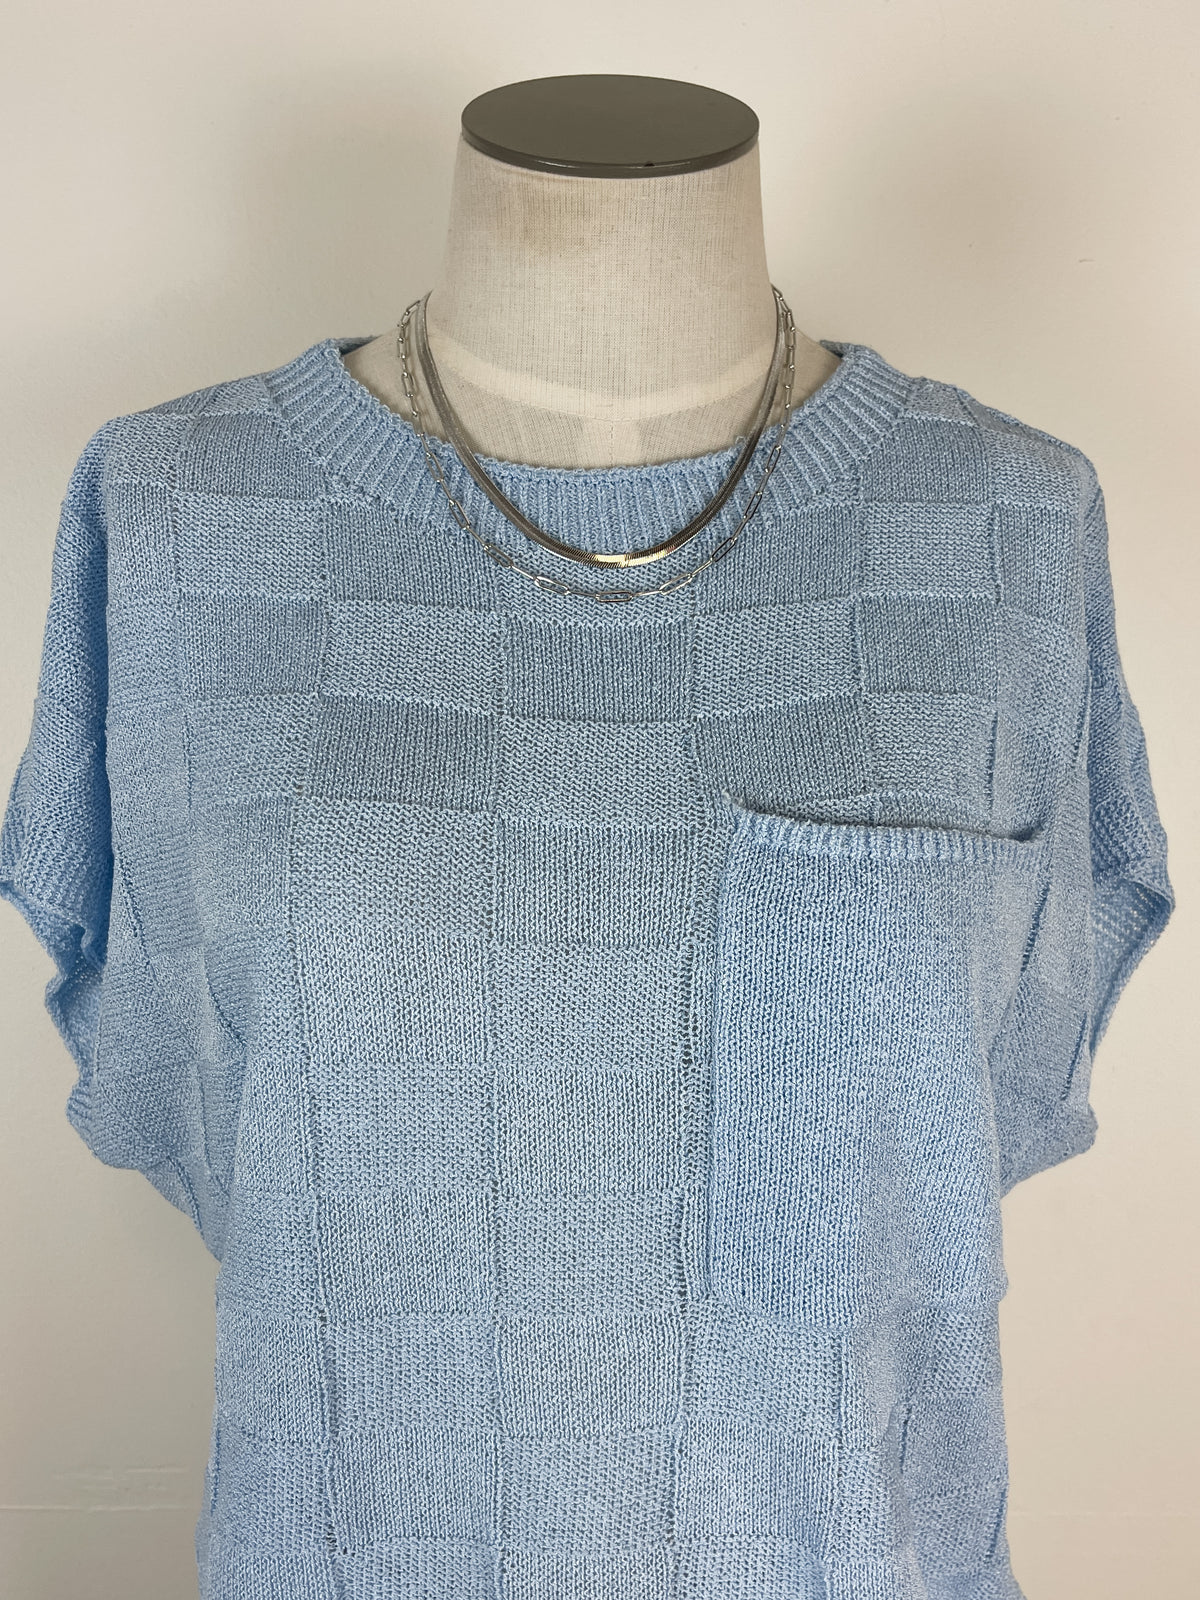 Elina Checkered Top in Misty Blue